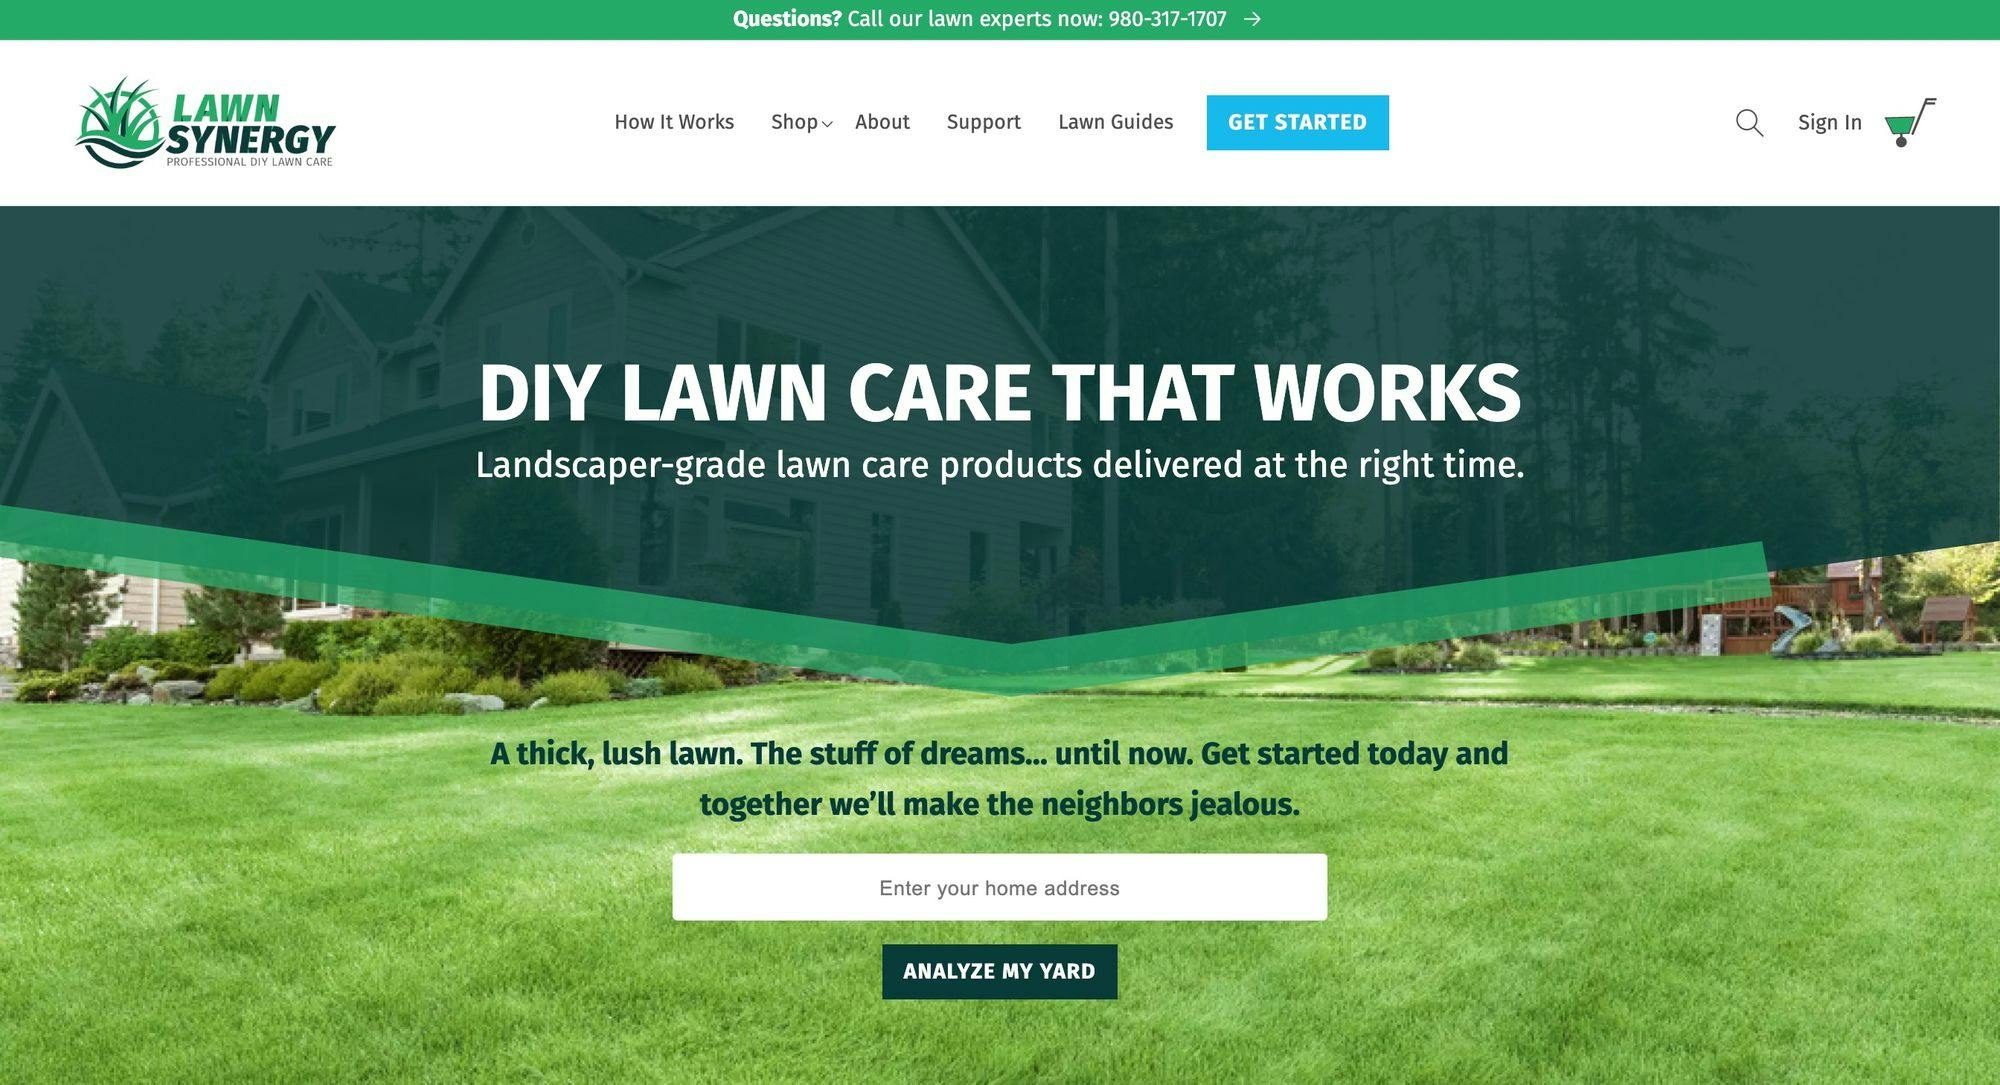 Lawn Synergy homepage